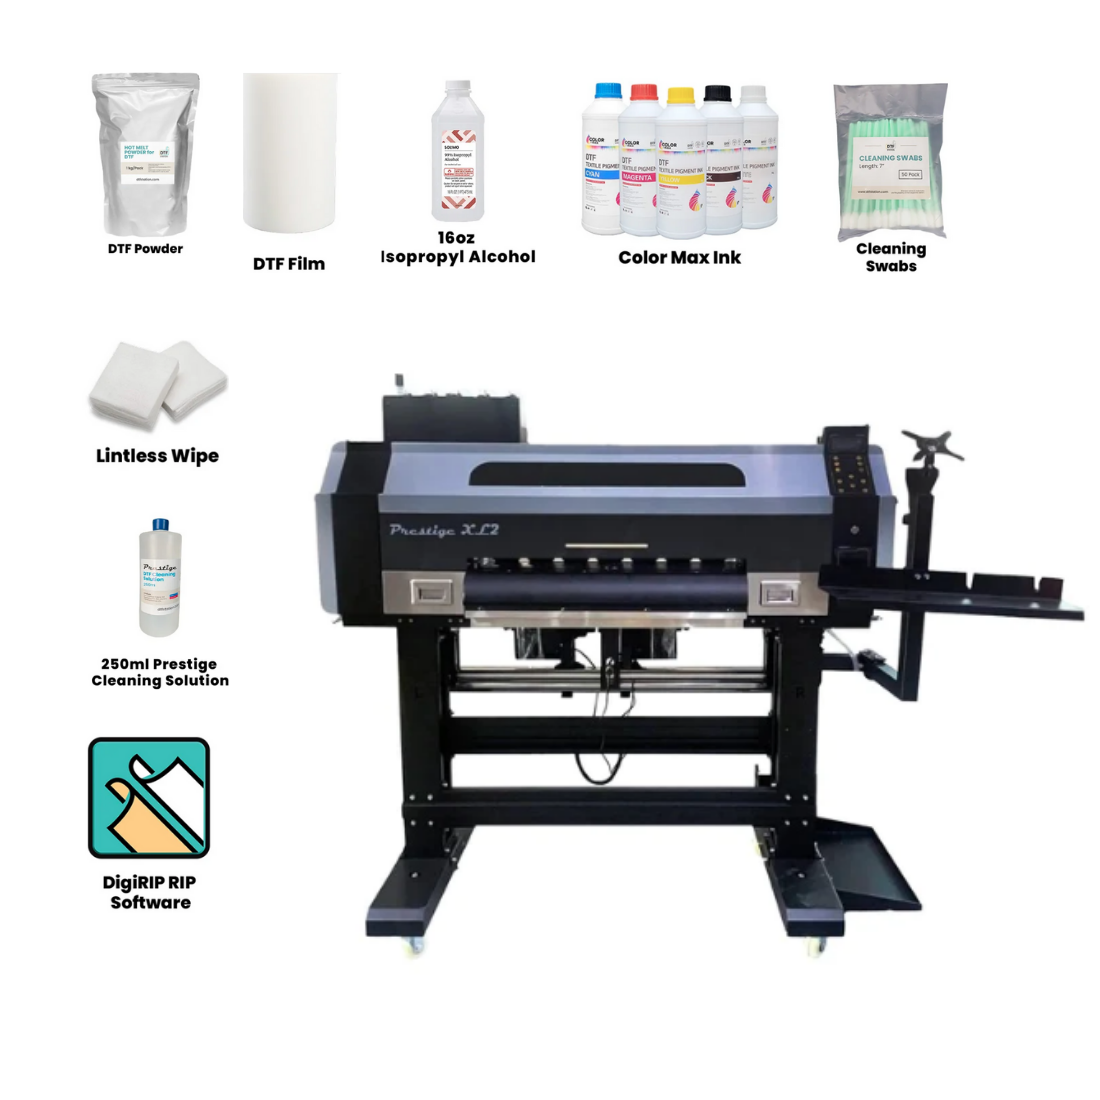 Fluorescent DTF Printing and Printer Setup available.